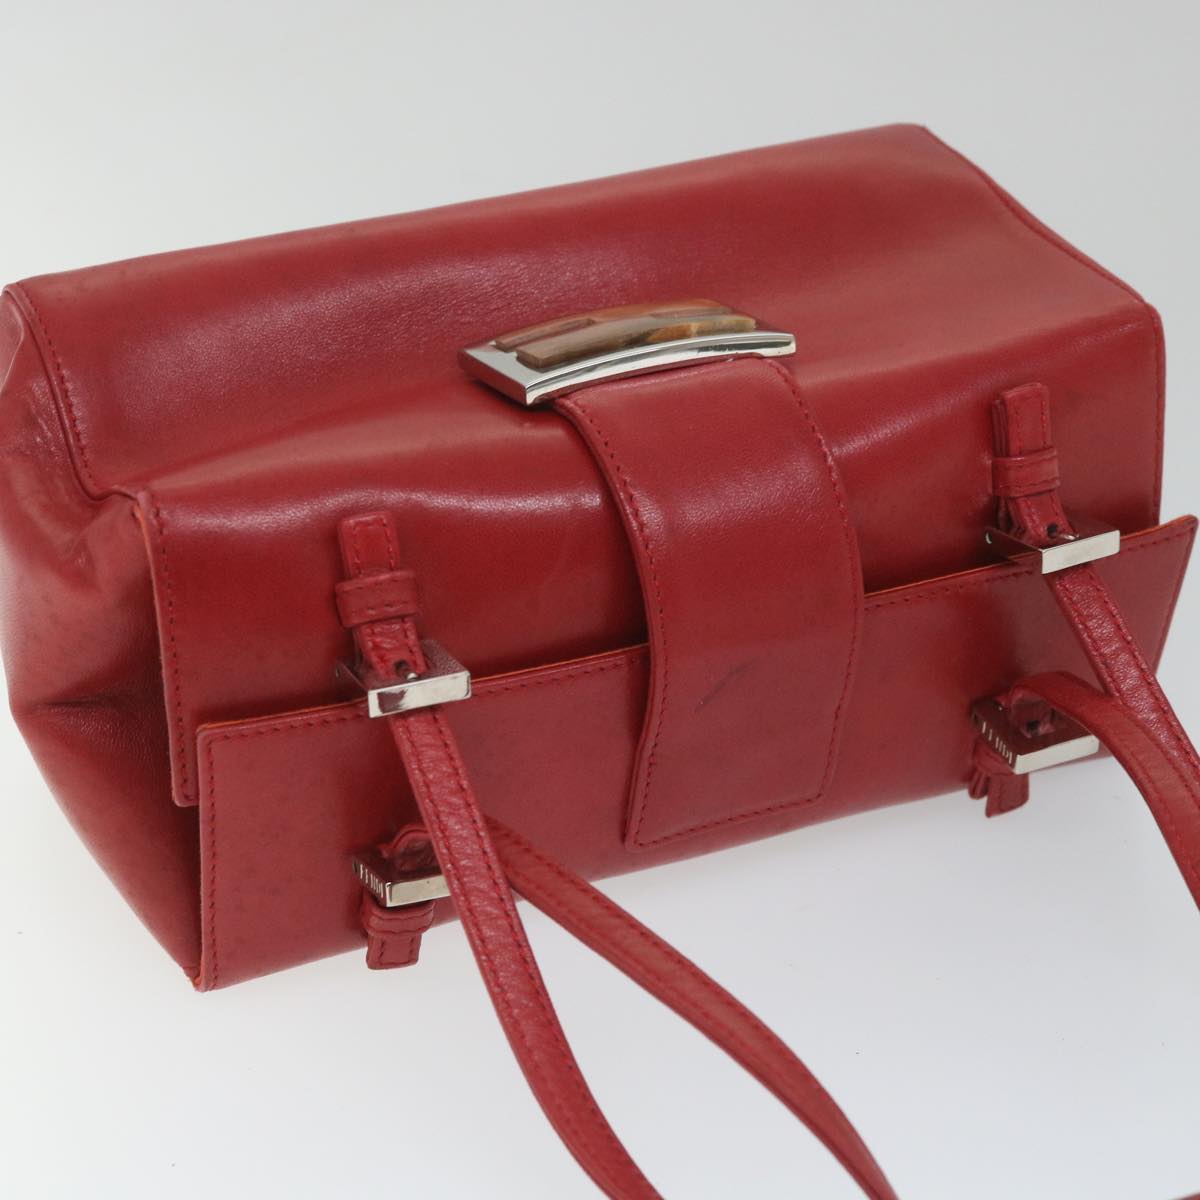 FENDI Mamma Baguette Hand Bag Leather Red Auth 56545